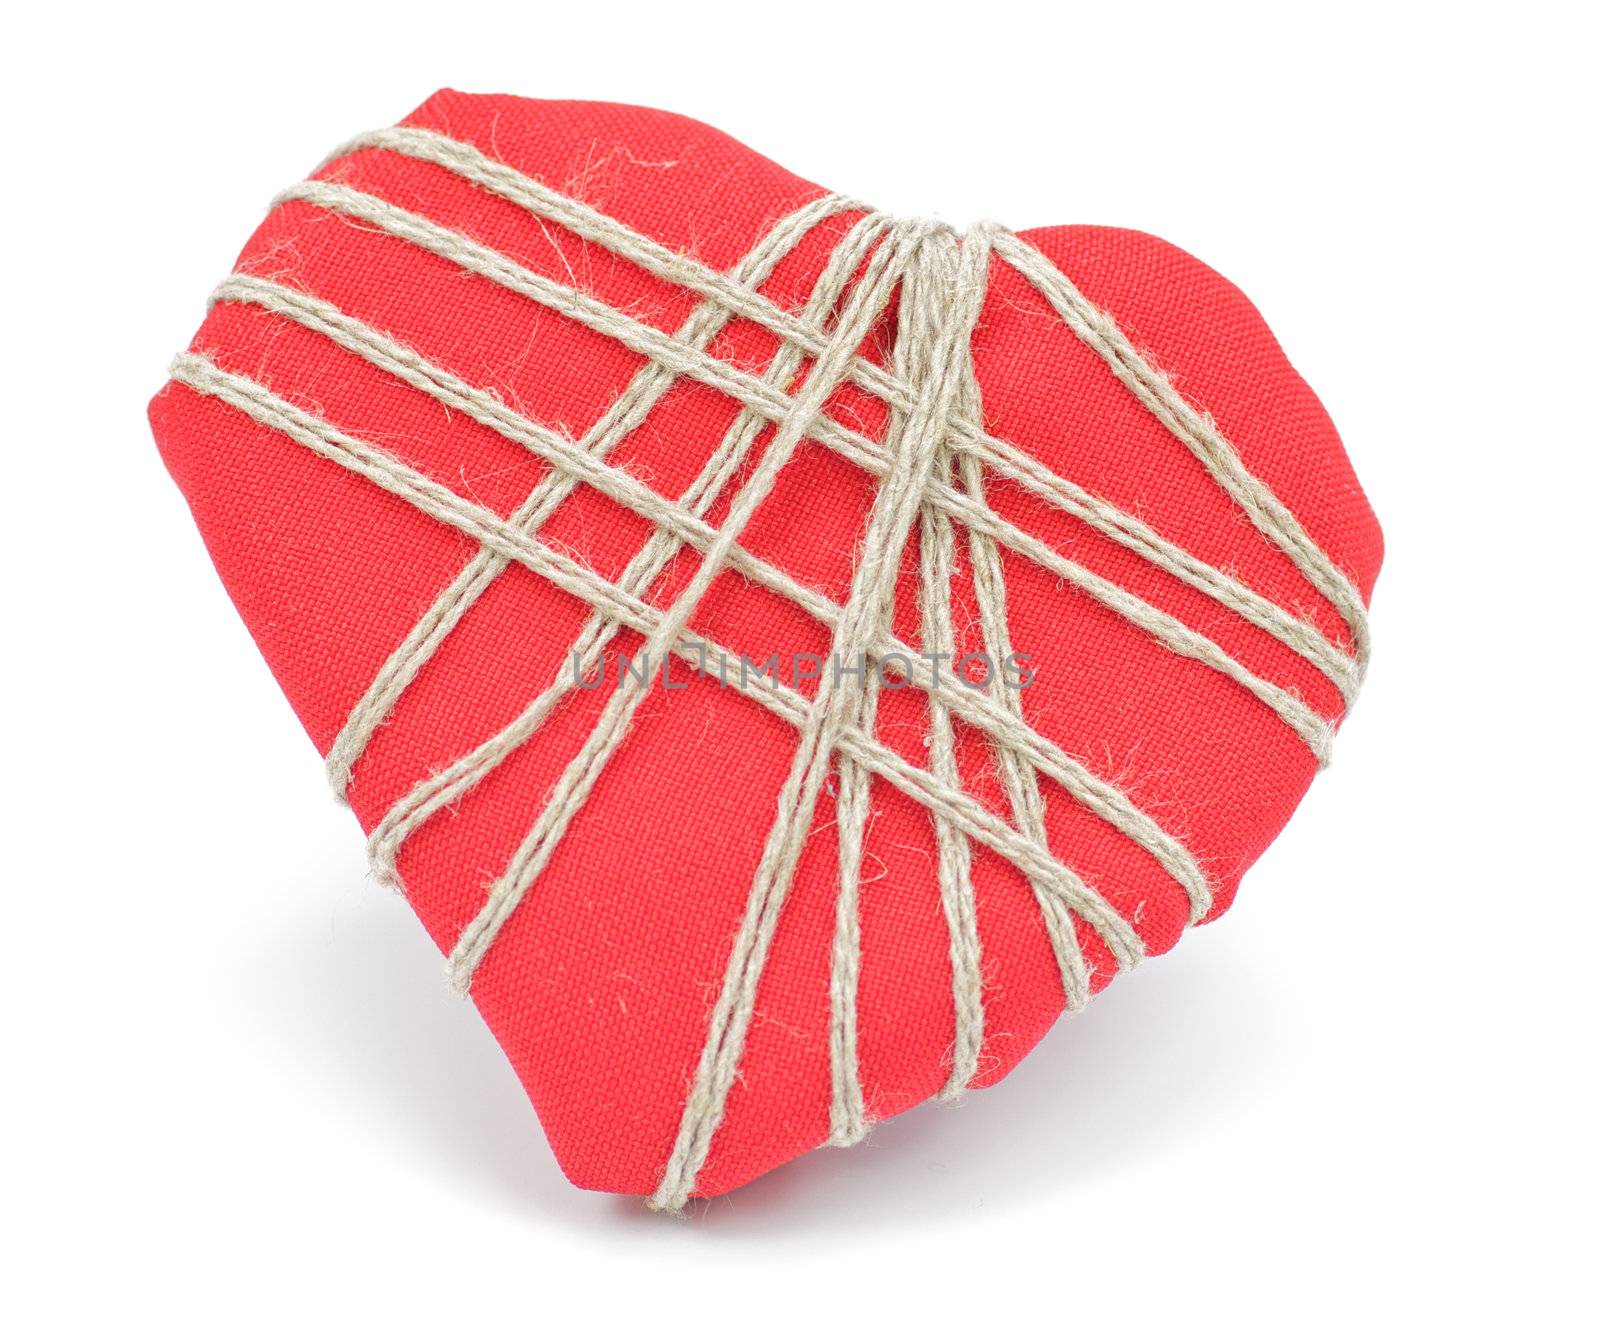 Handmade Valentine Red Heart decorated with cord threads